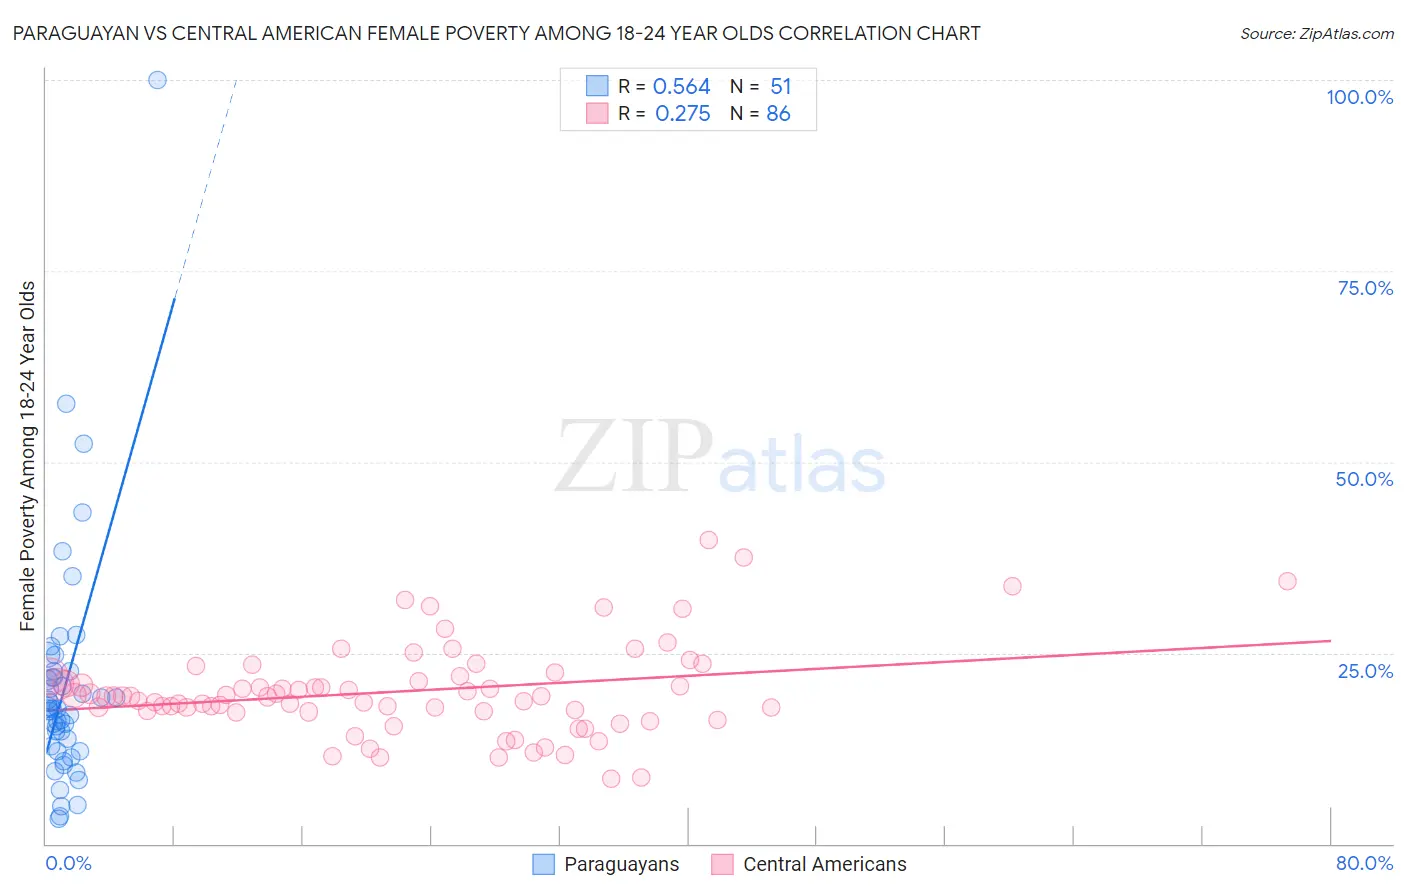 Paraguayan vs Central American Female Poverty Among 18-24 Year Olds